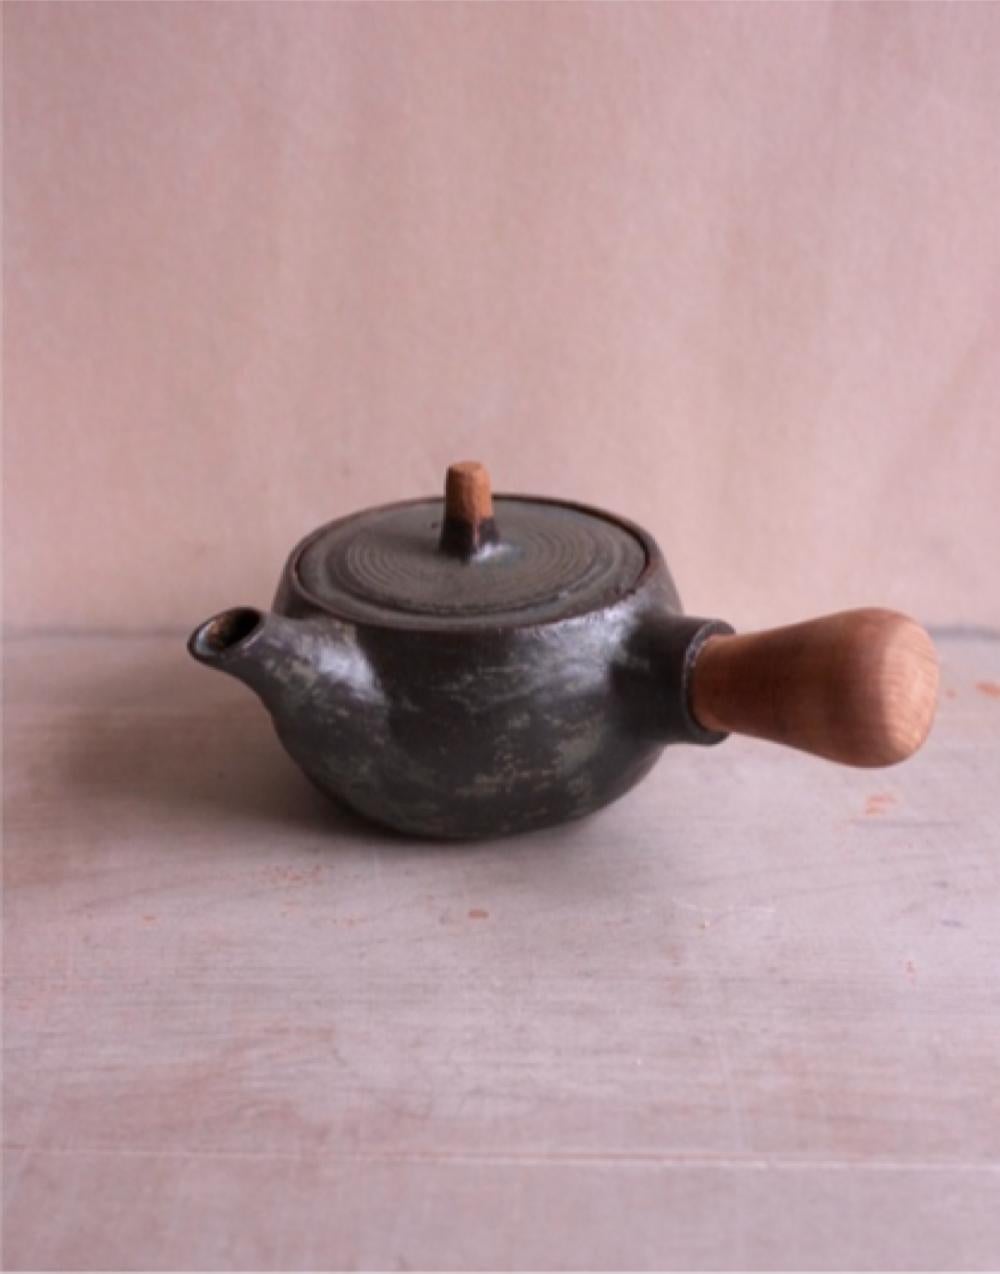 ?Title : Wheel thrown tea pot with wooden handle in ochre clay and
Matte midnight blue/black + sheer glaze
2021s / Belgium
Size : W 150 x D 190 x H 75 mm
Artist : Sigrid Volders


[Sigrid Volders]
Based in Antwerp, Belgium, she works